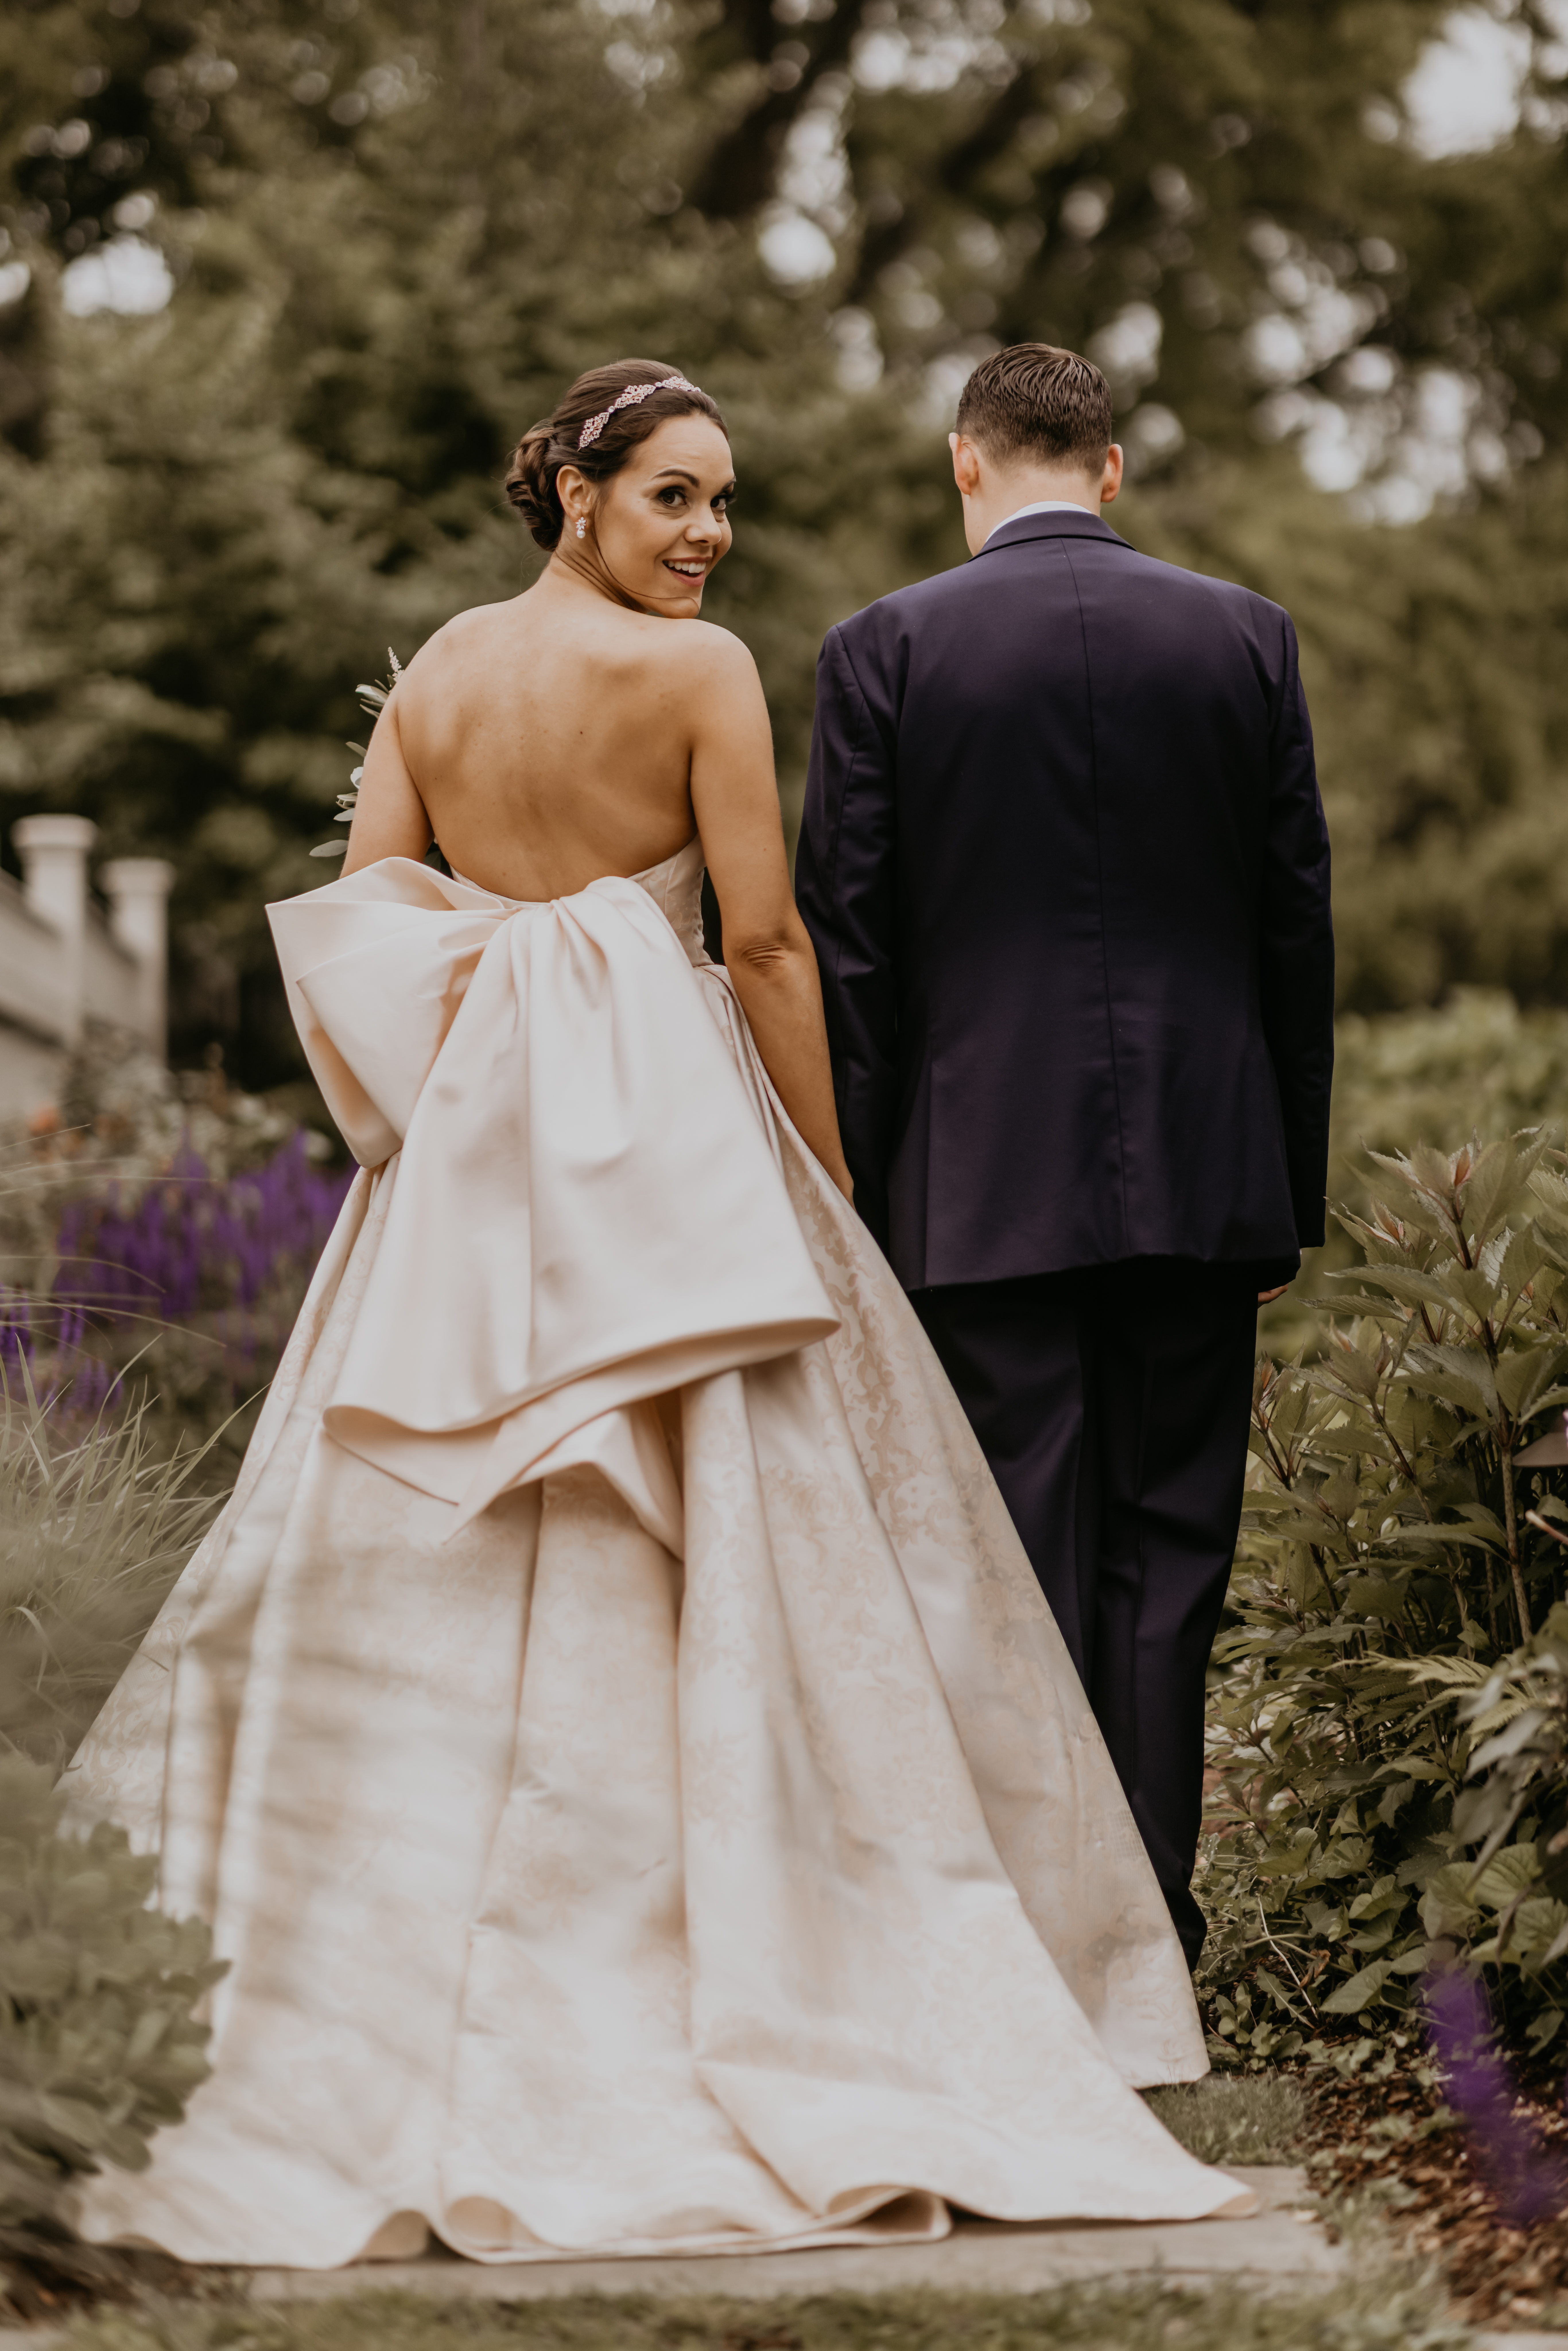 Saying "Yes" to the Dress: interview with Laura Alfred of Sparks Bridal in Cranston RI on Wedding Secrets Unveiled! podcast